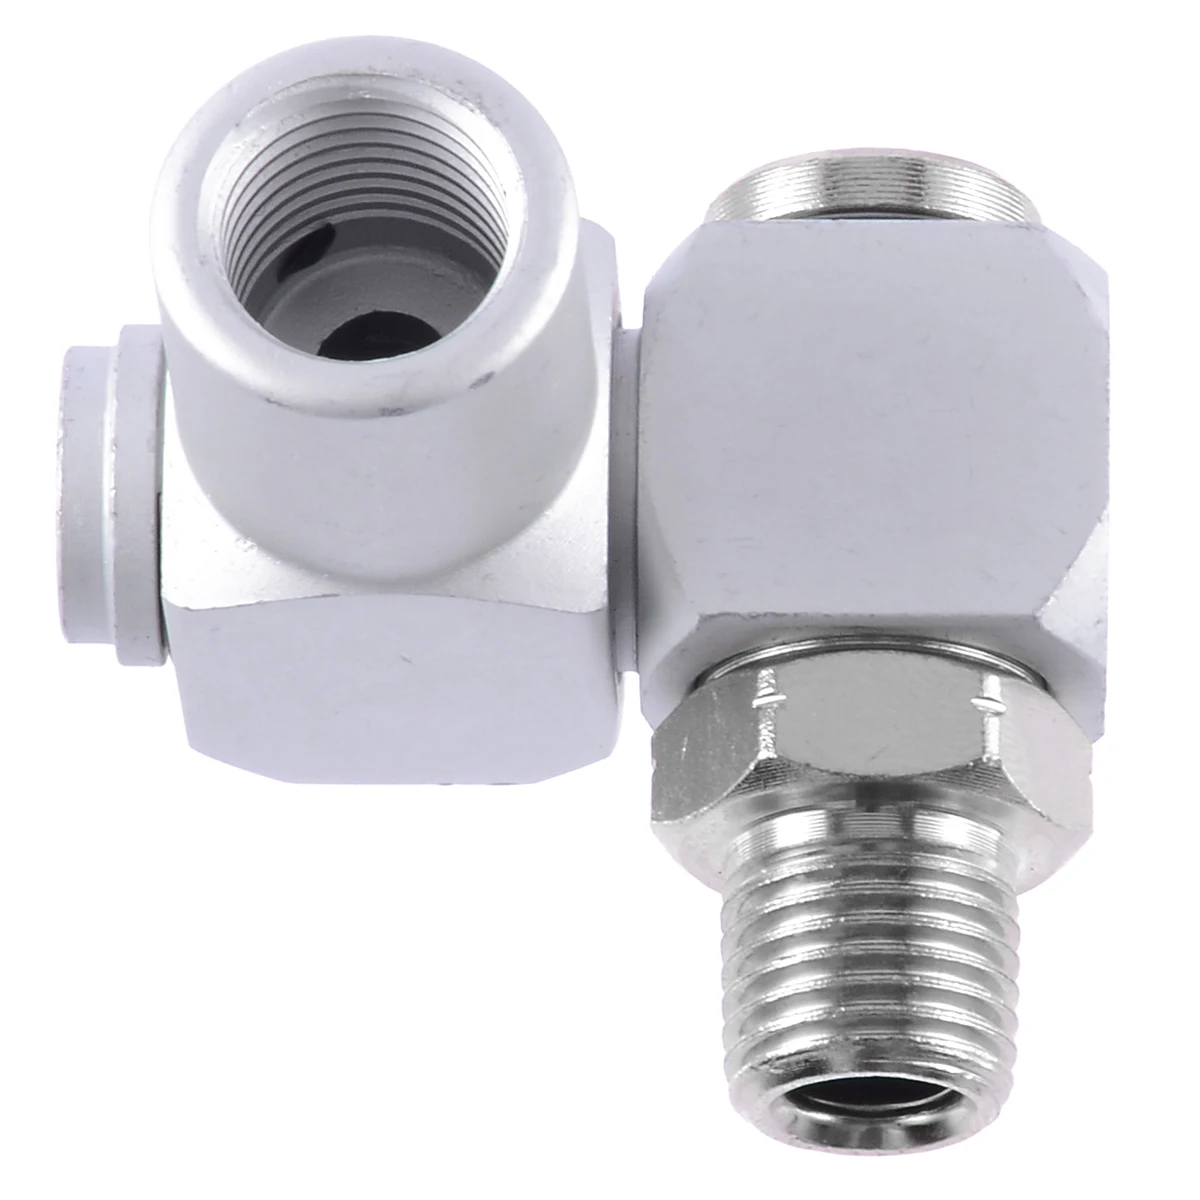 1/4Aluminum 360° Swivel Air Hose Connector Adapter Fitting Tool Coupler Silver 